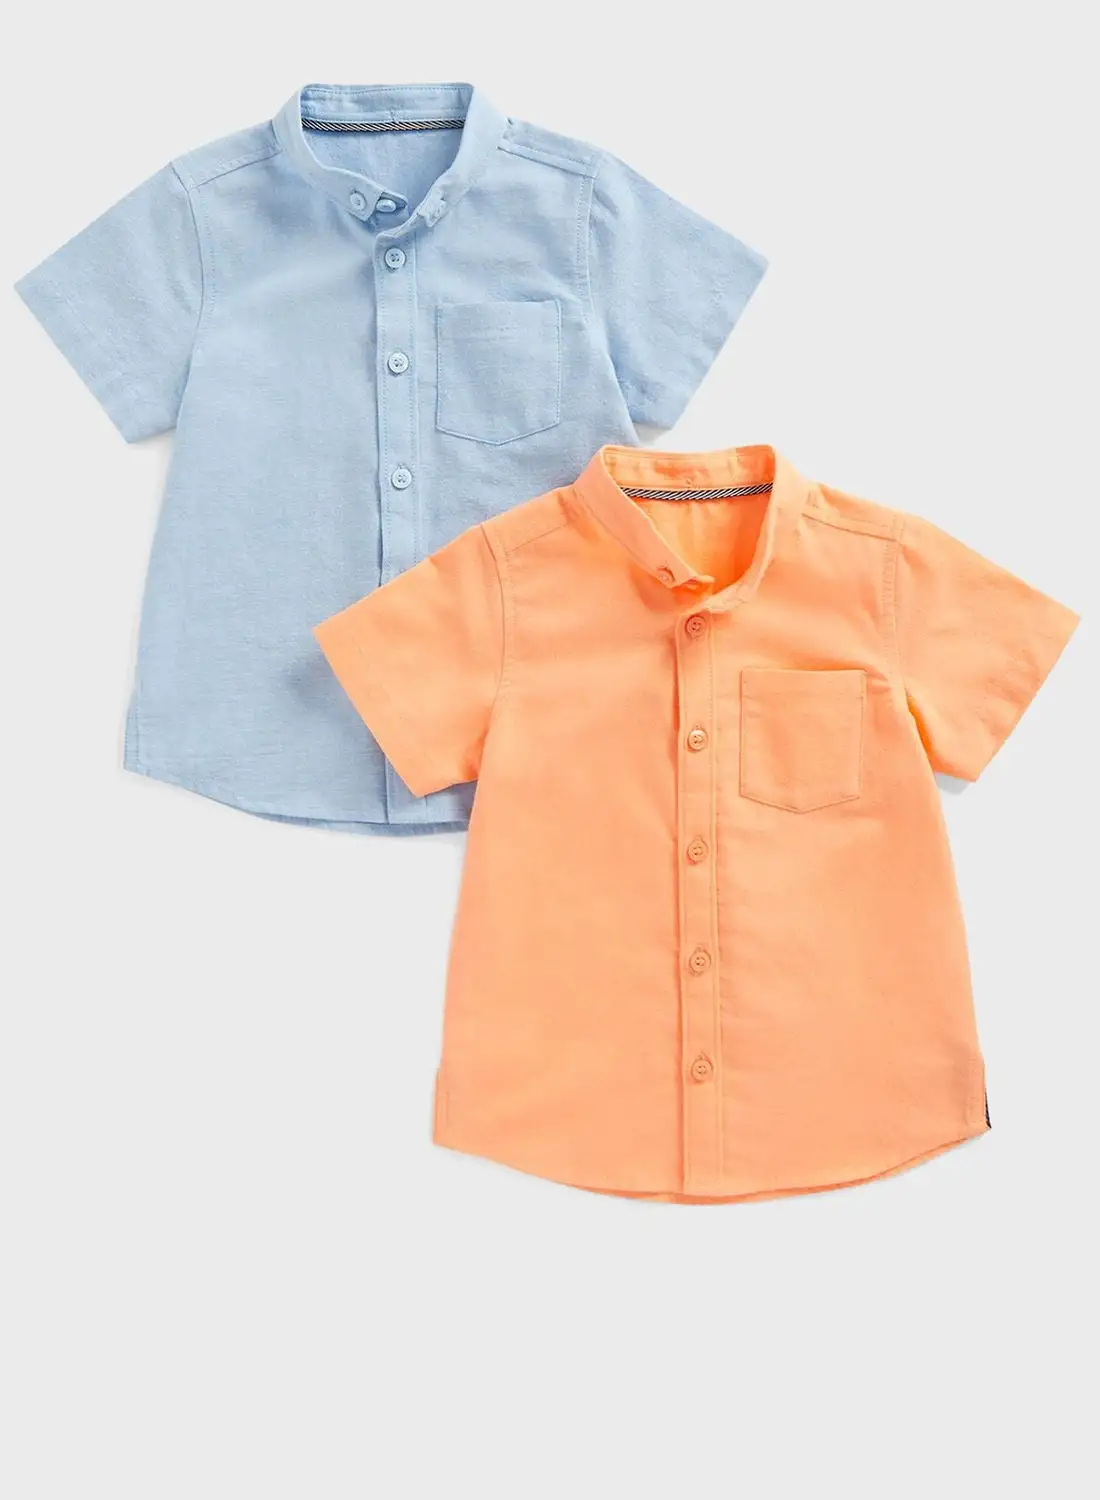 mothercare Kids 2 Pack Essential Shirt